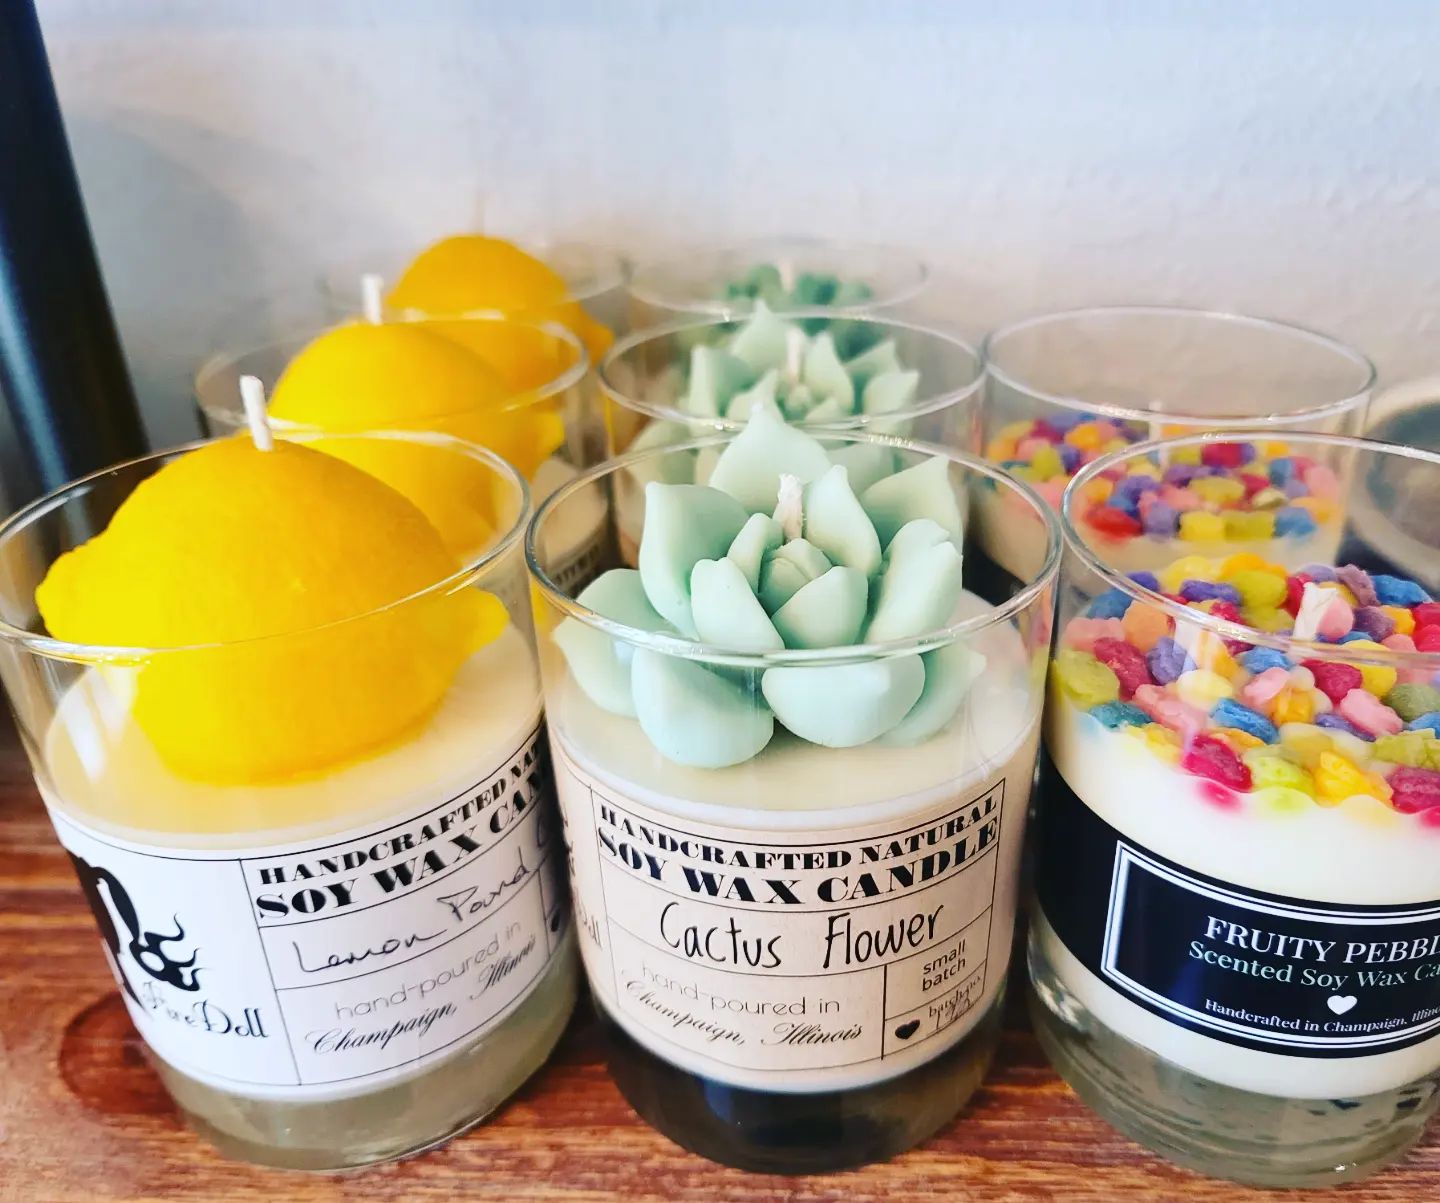 Three candles in glass jars on a shelf. On the left, a candle with a big yellow lemon on top; in the middle a candle with light green cactus flowers on top; on the right, a candle with fruity pebbles cereal on top. Photo from the Firedoll Studio Facebook page.